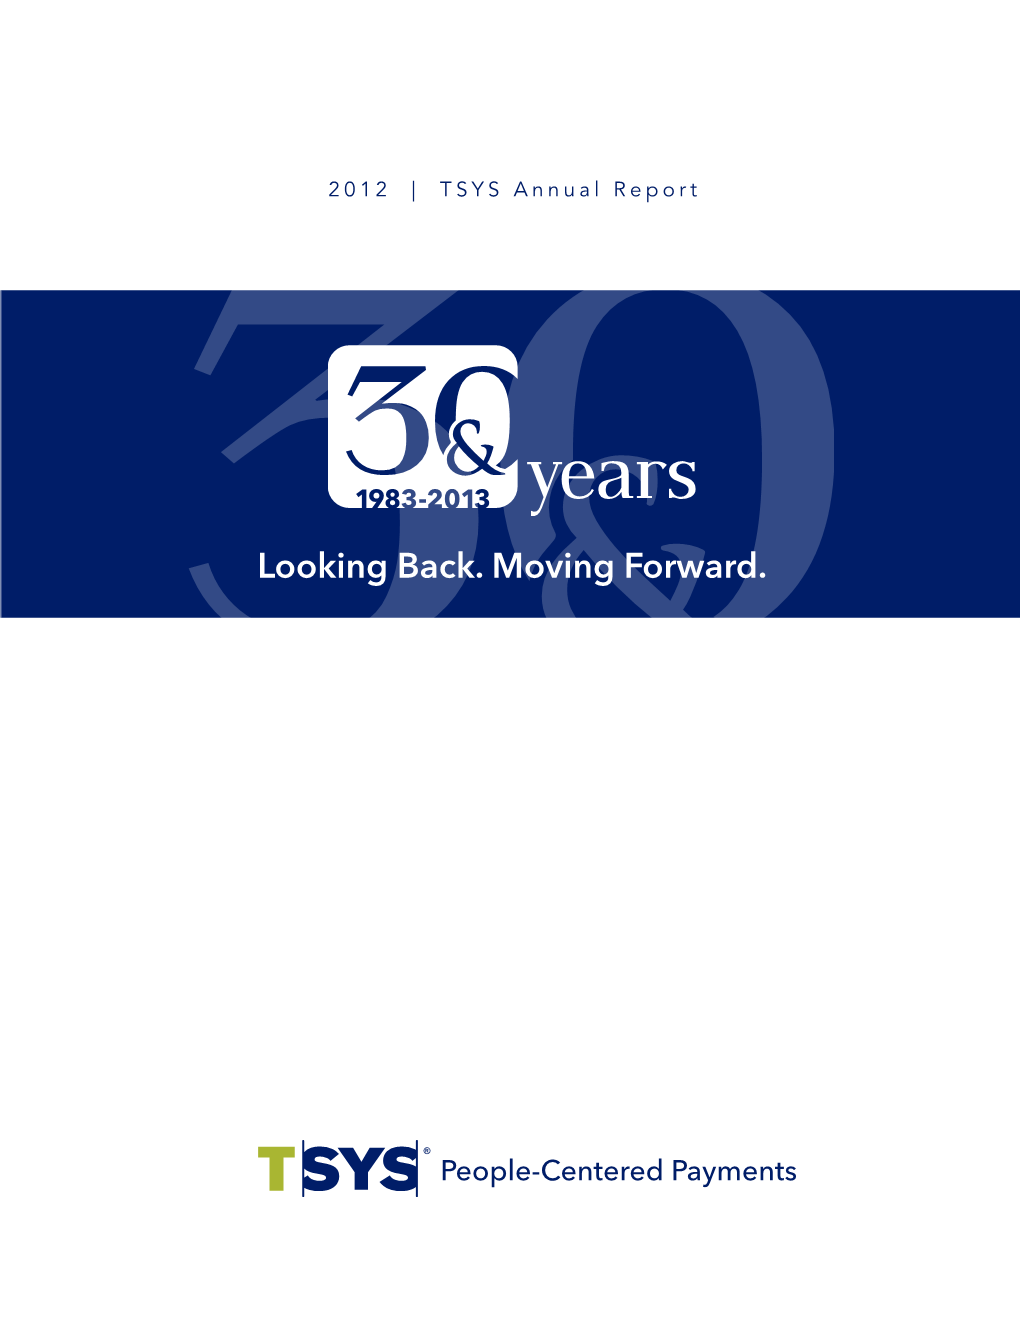 Total System Services, Inc. 2012 Annual Report